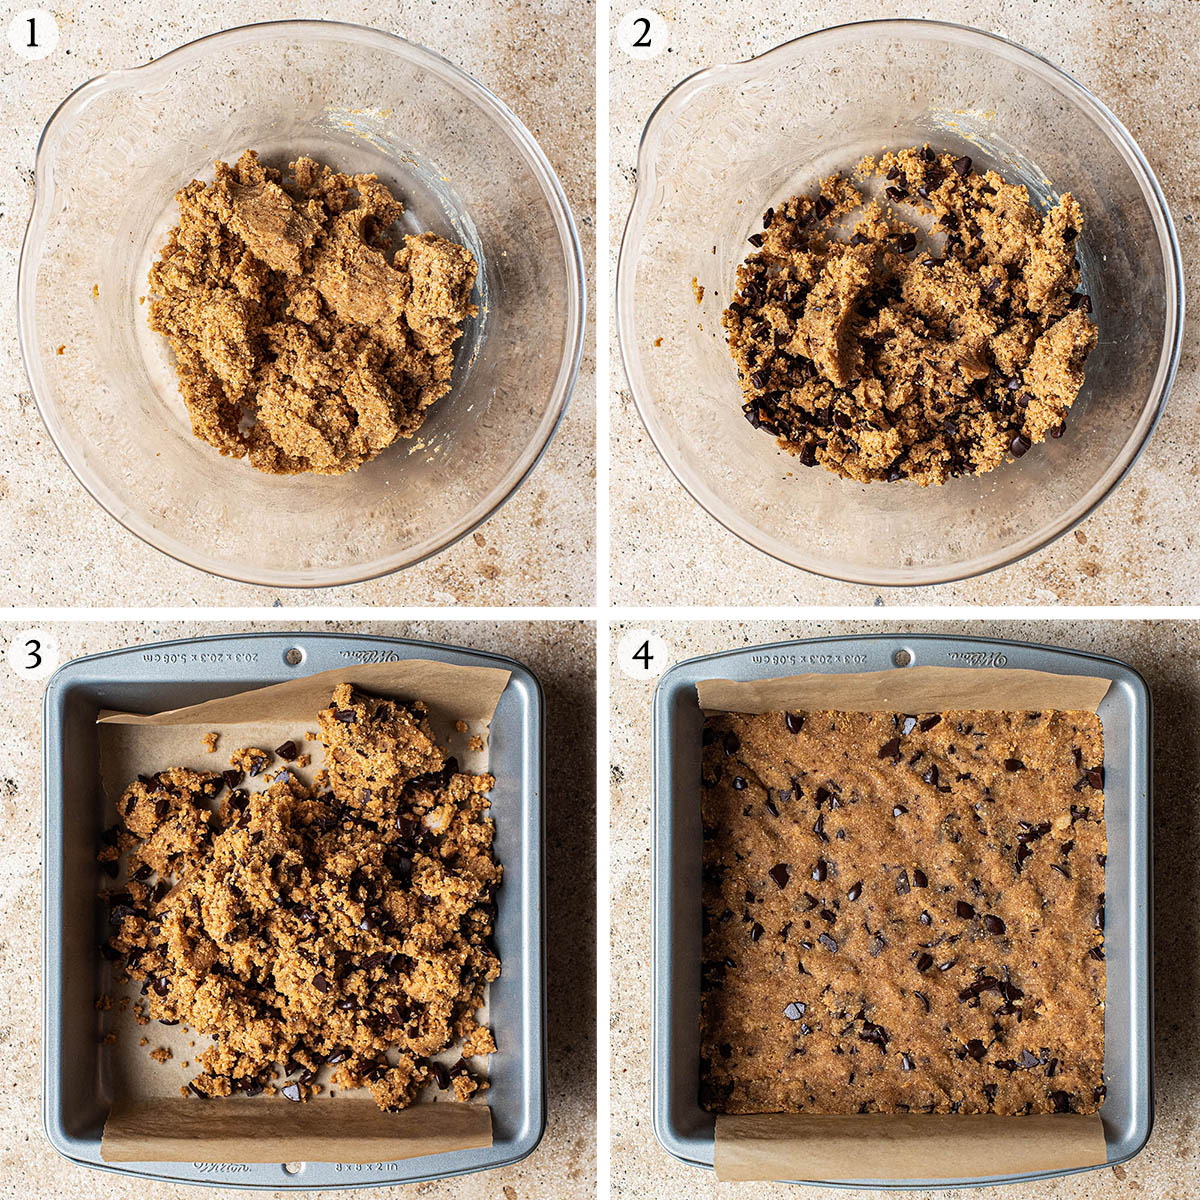 Cookie dough steps 1 to 4.